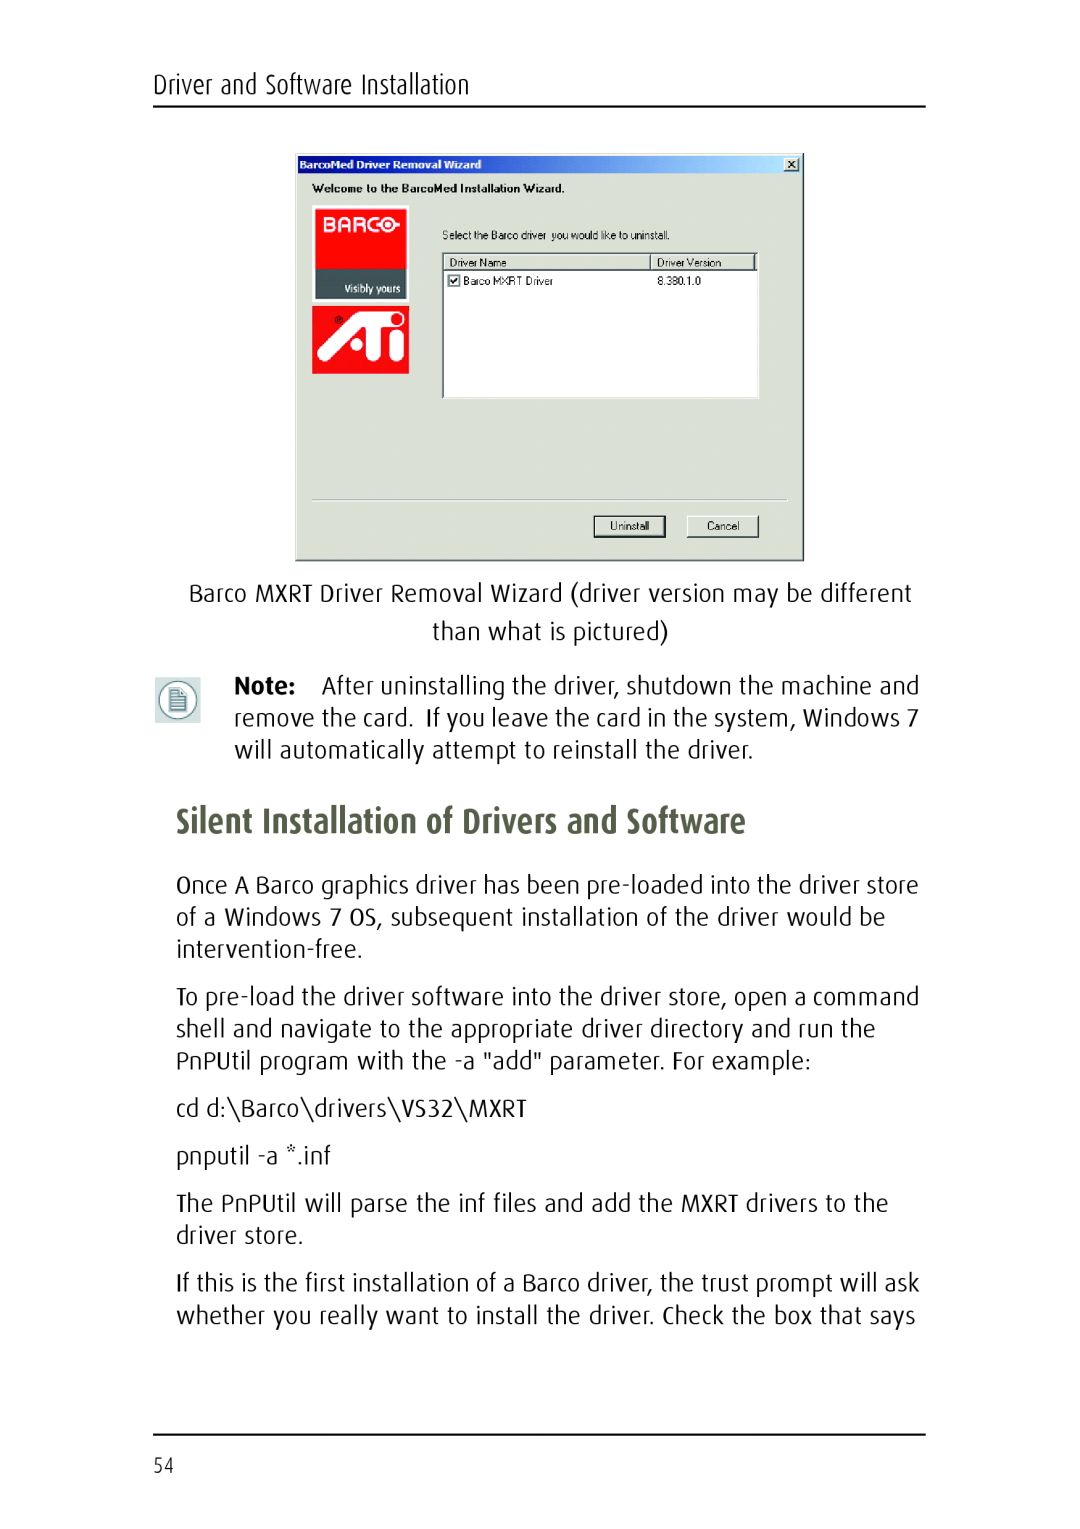 Barco MDCC 6130 manual Silent Installation of Drivers and Software, Driver and Software Installation 